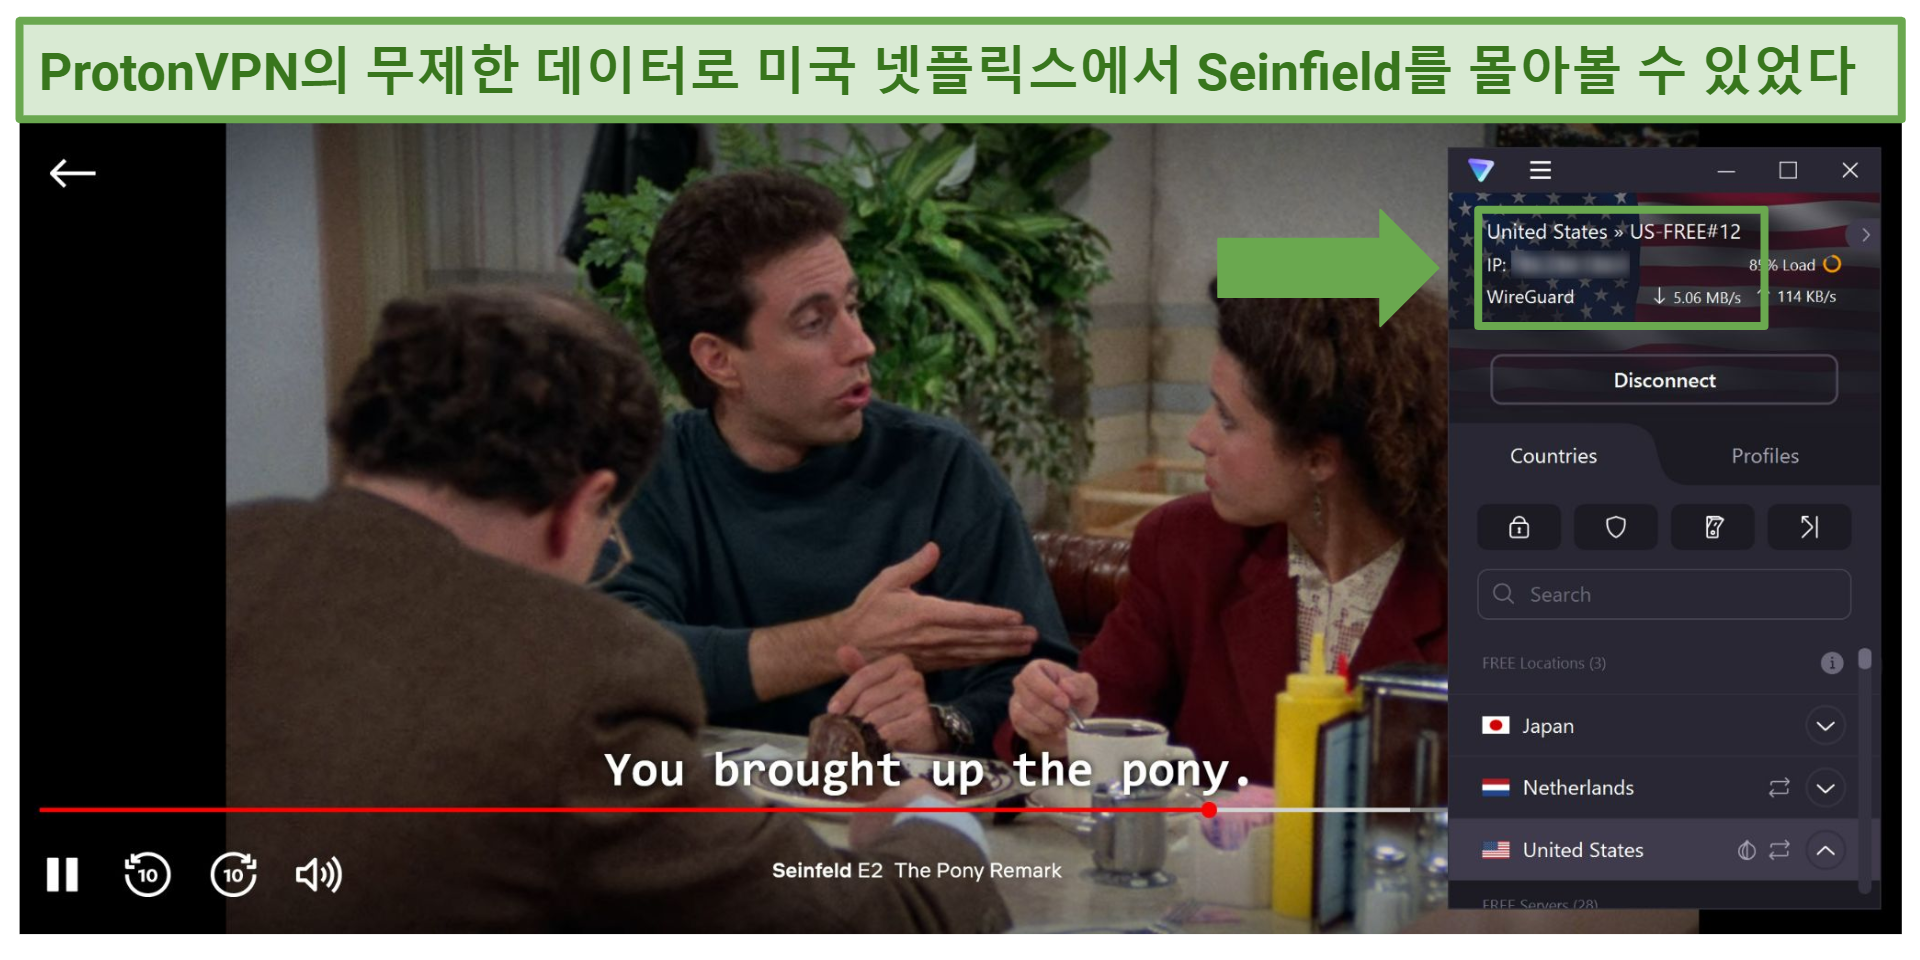 Screenshot of Seinfield streaming on Netflix with ProtonVPN connected